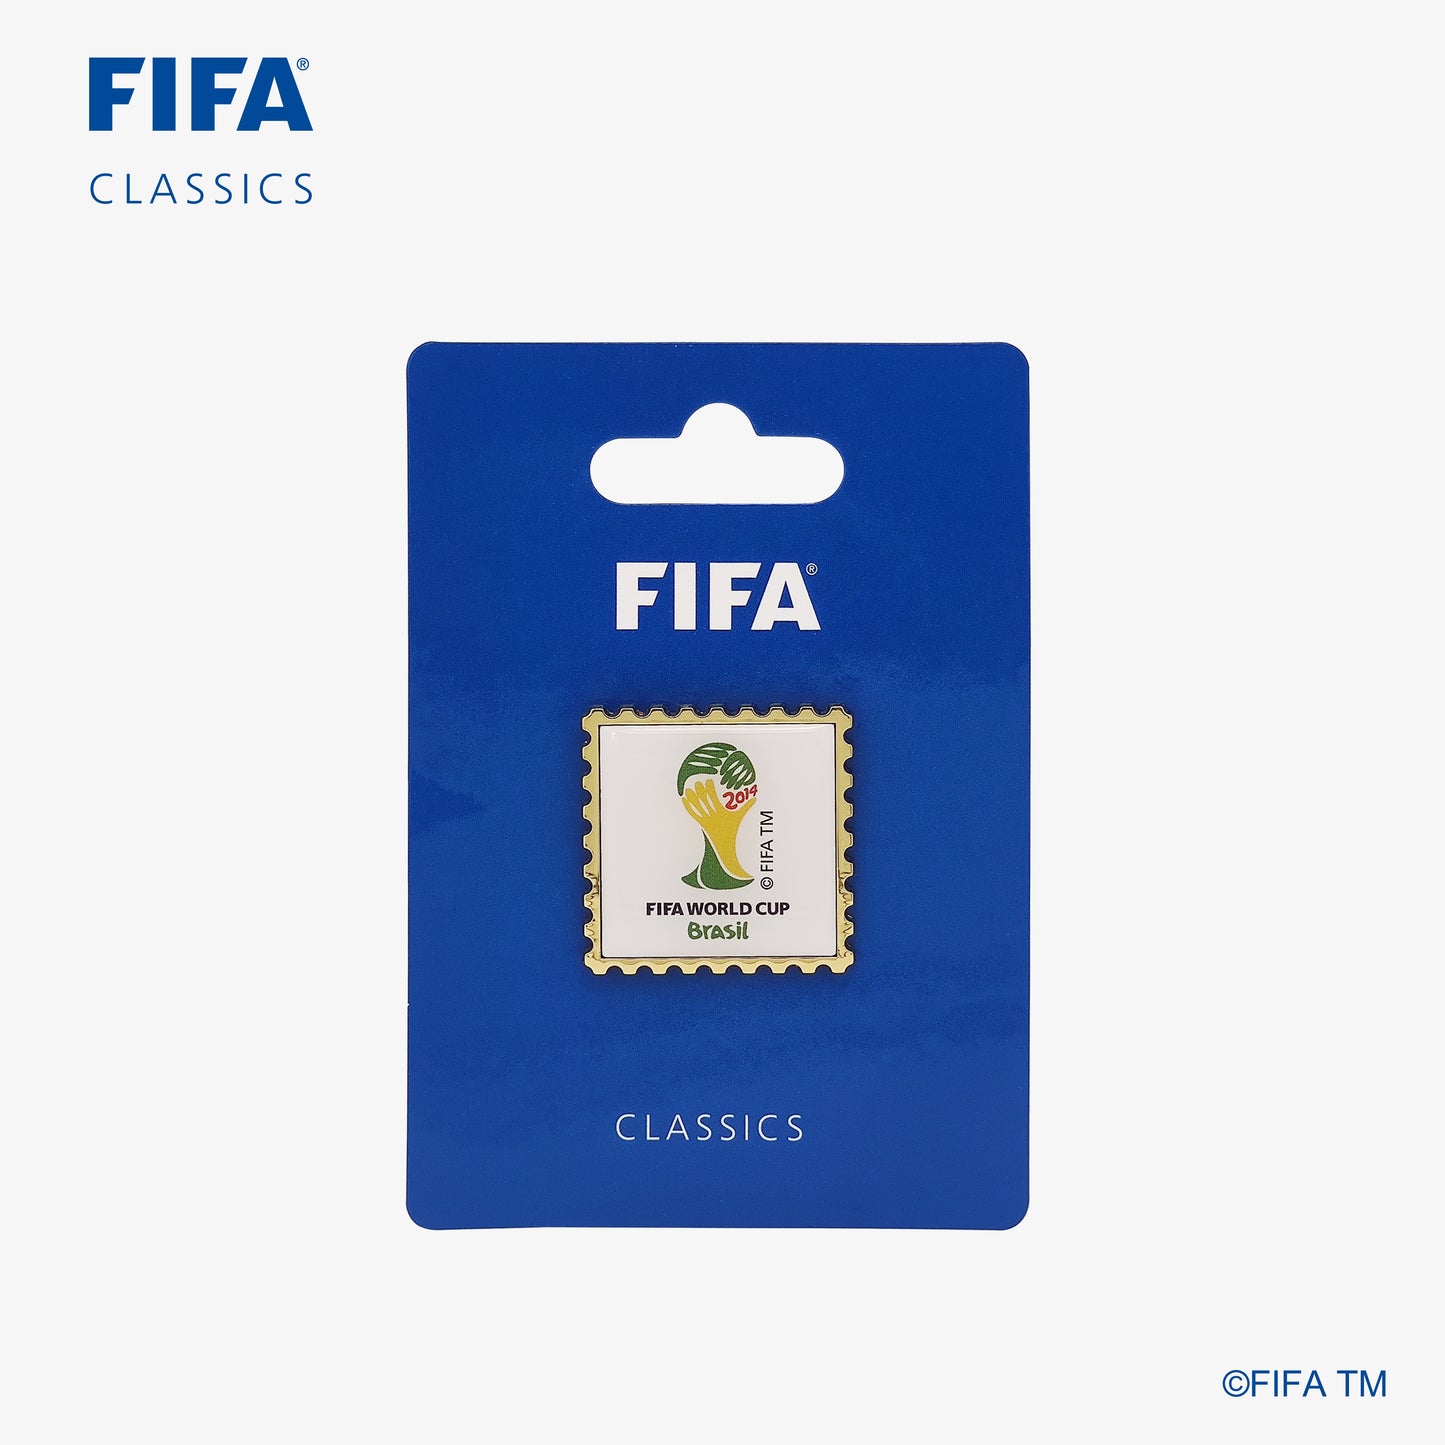 Historical Pin with FIFA classic blue package